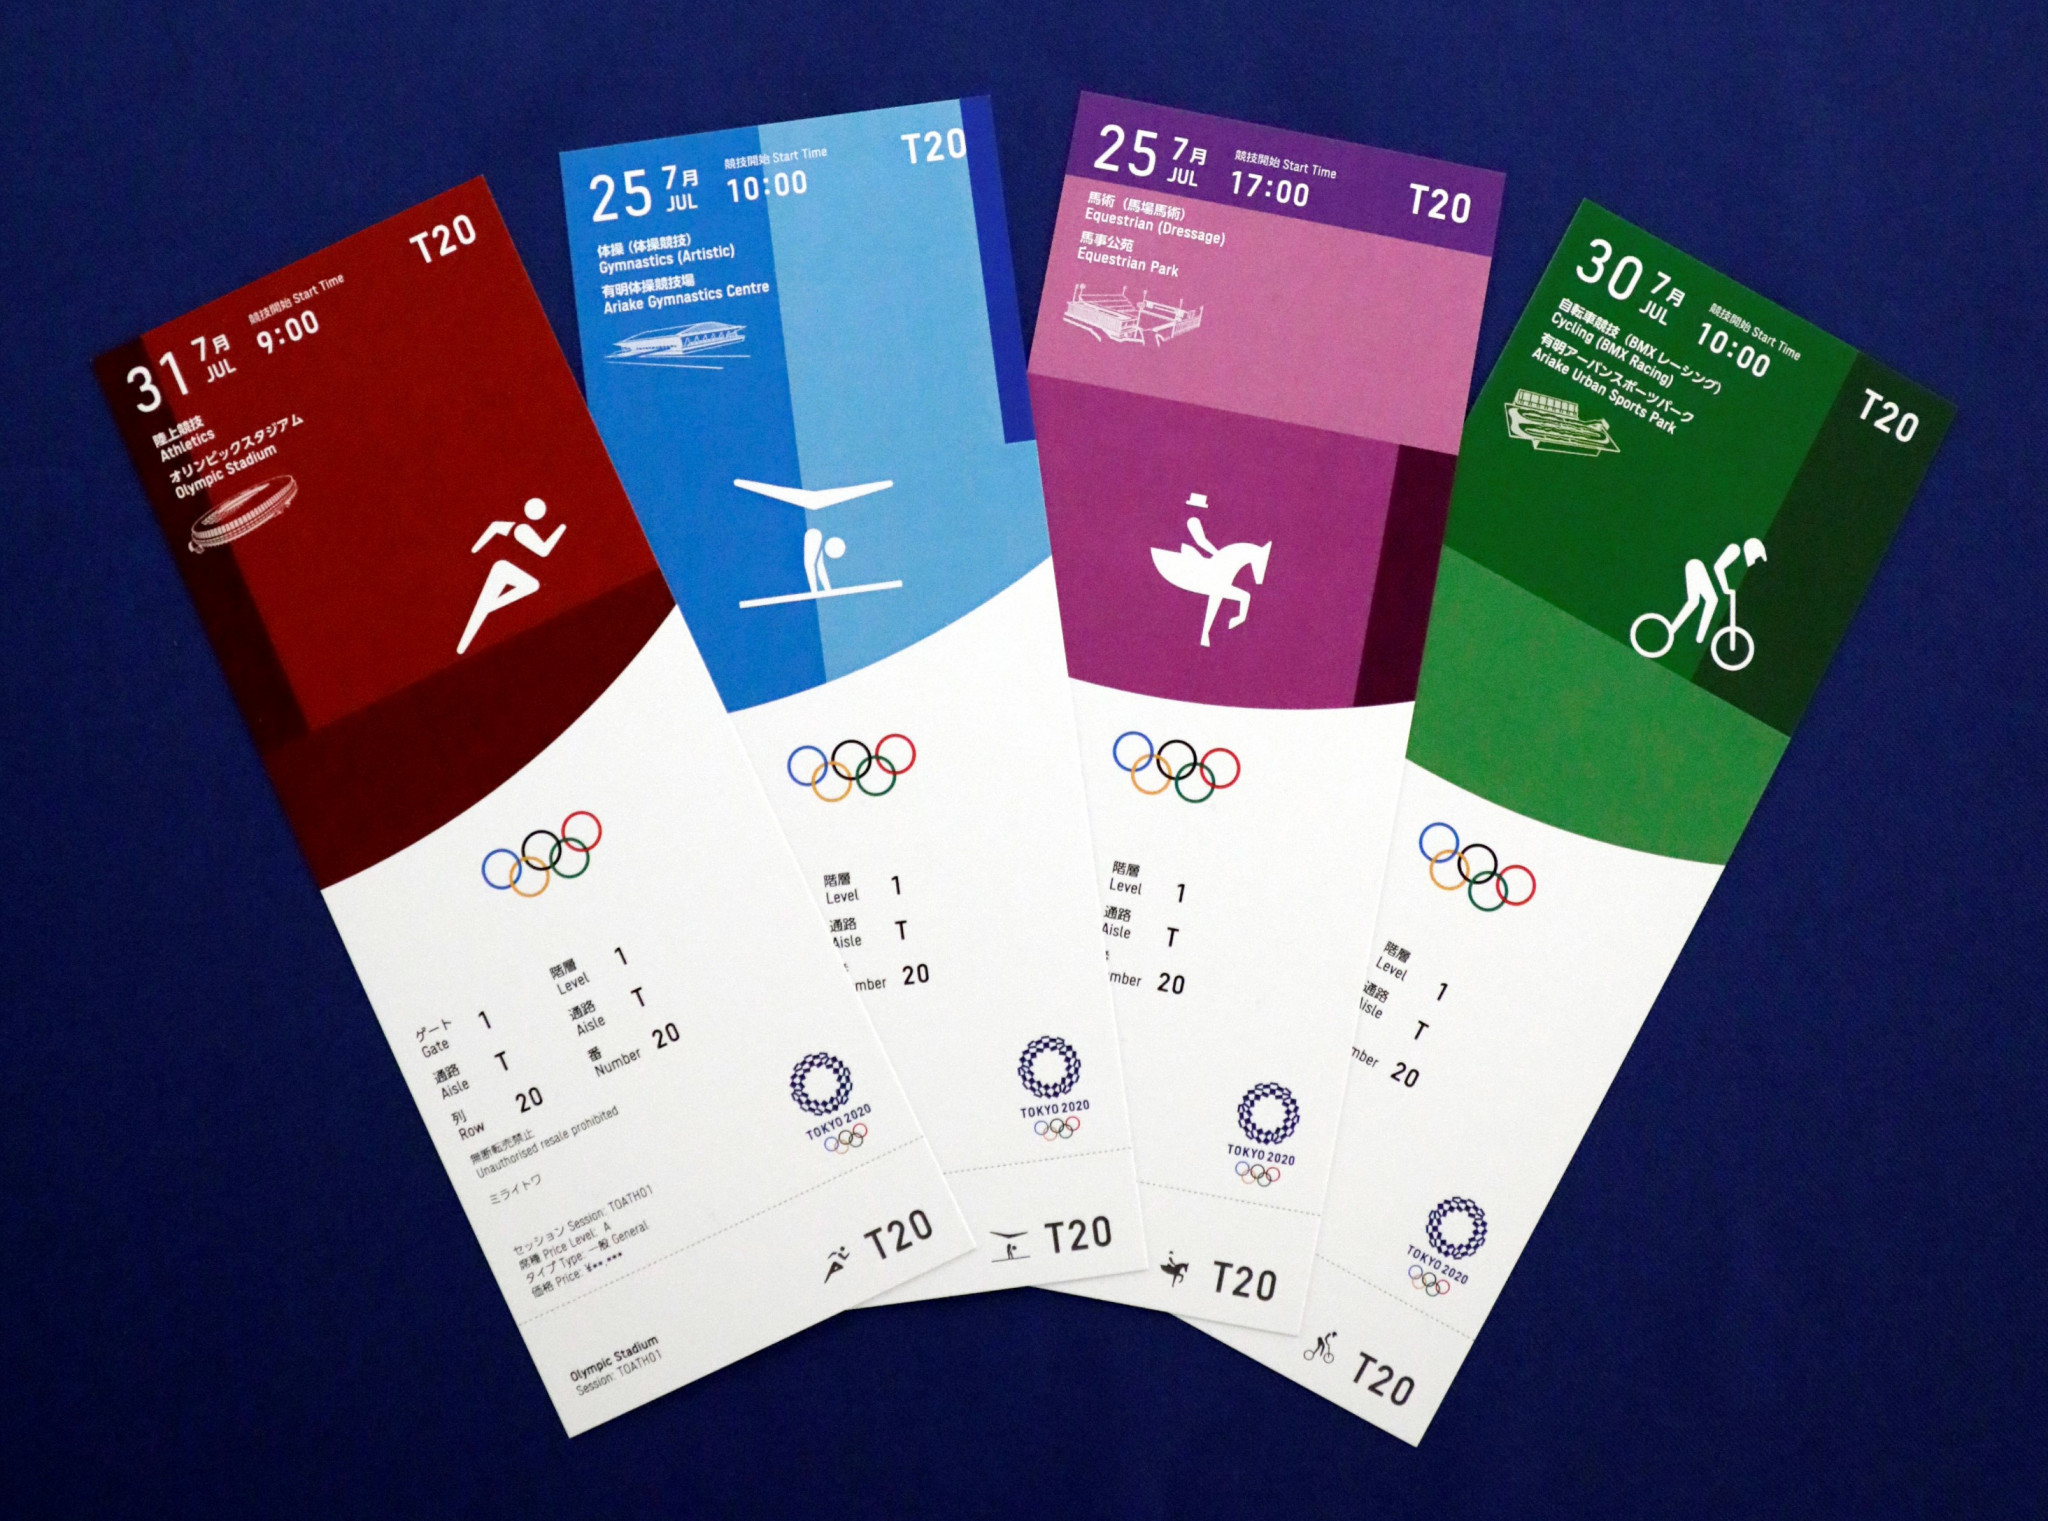 Japanese residents will be able to request refunds for Olympic tickets until November 30 ©Tokyo 2020